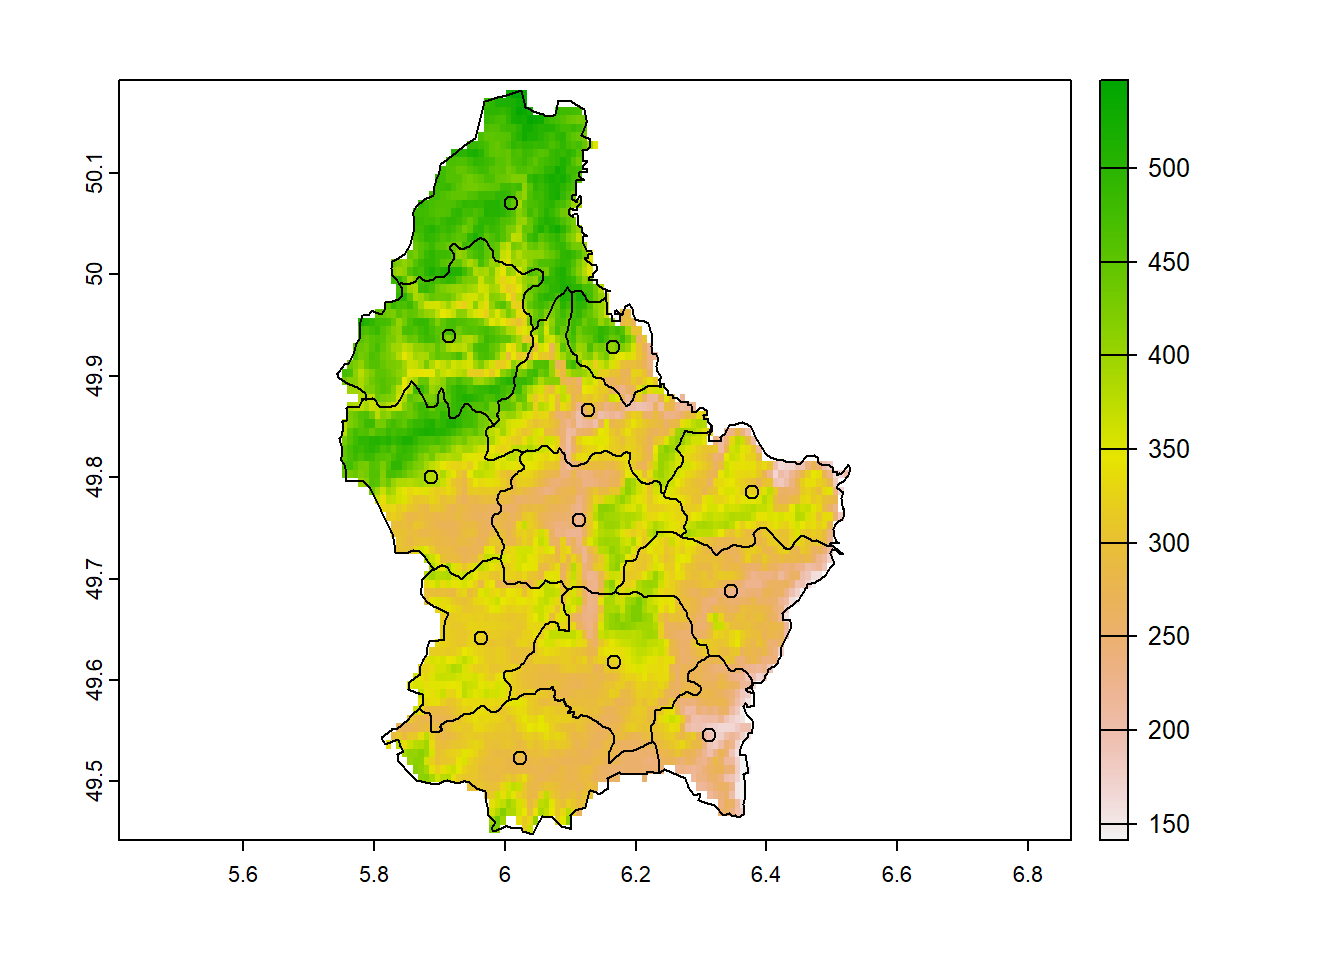 Elevation raster, and division and centroids of polygons in Luxembourg.